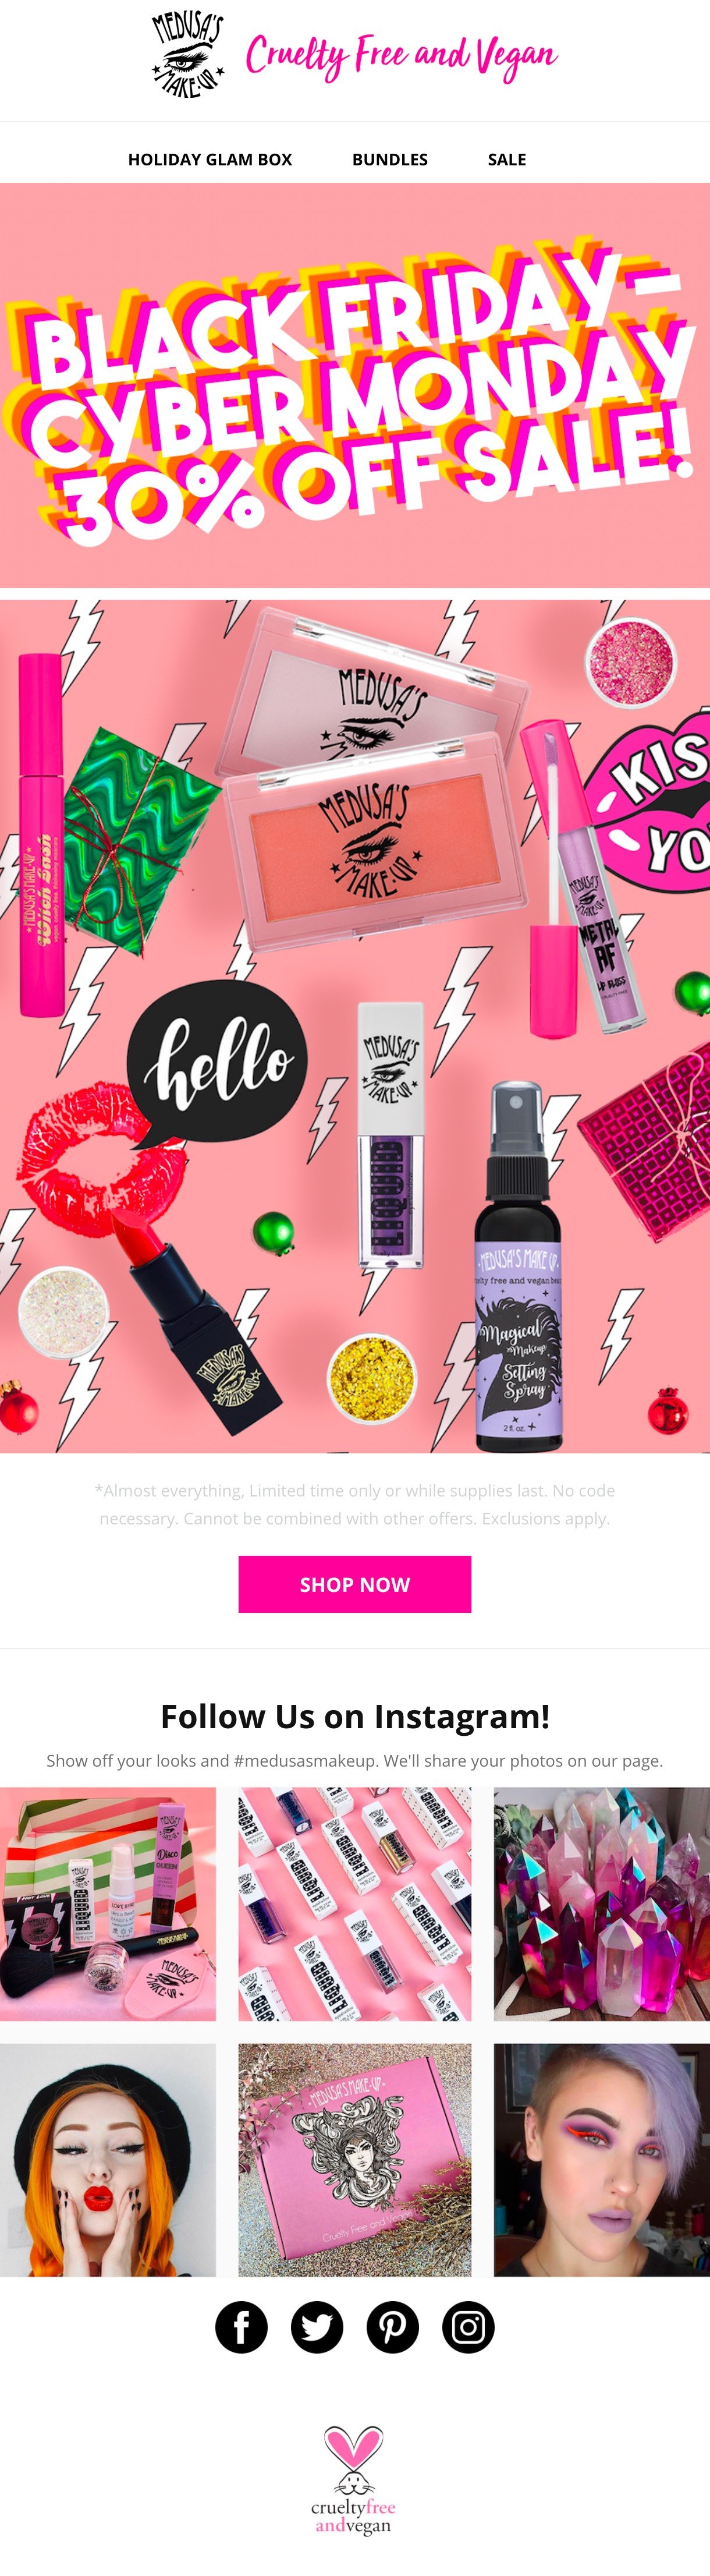 Medusa's Makeup Black Friday email example colorful pink